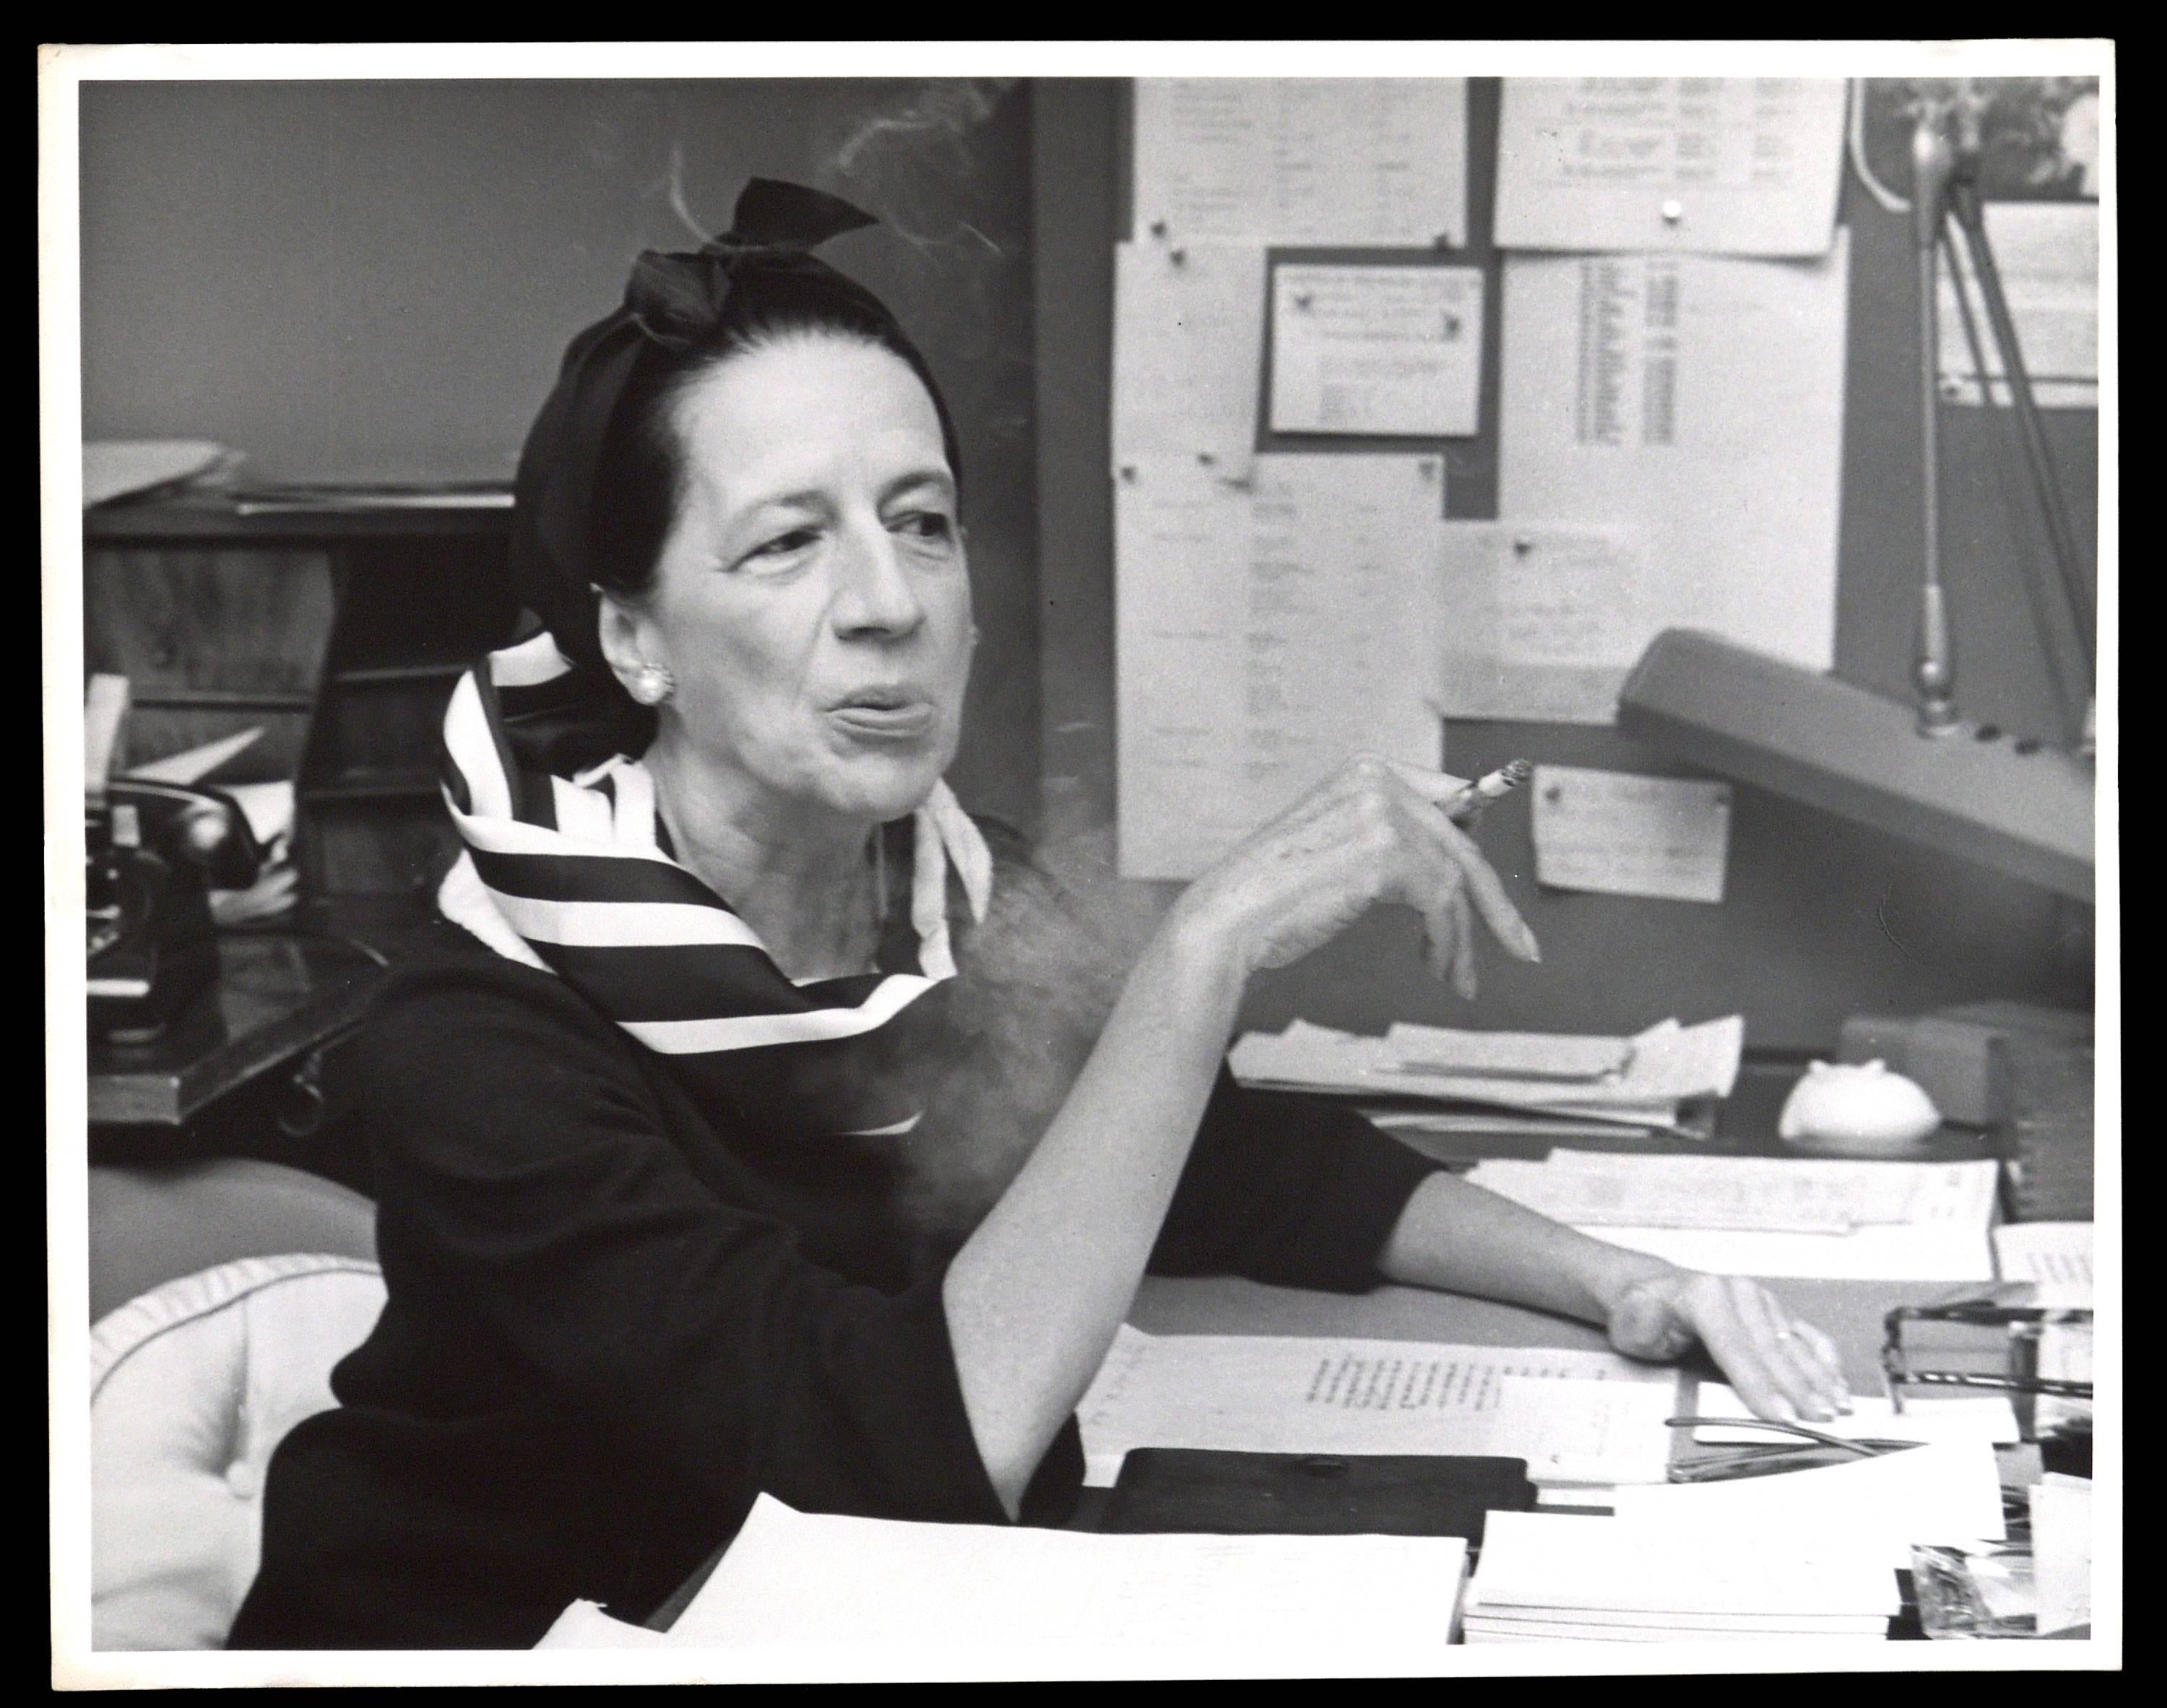 Tony Palmieri Black and White Photograph - Diana Vreeland at Vogue. DIANA VREELAND PRIVATE COLLECTION.